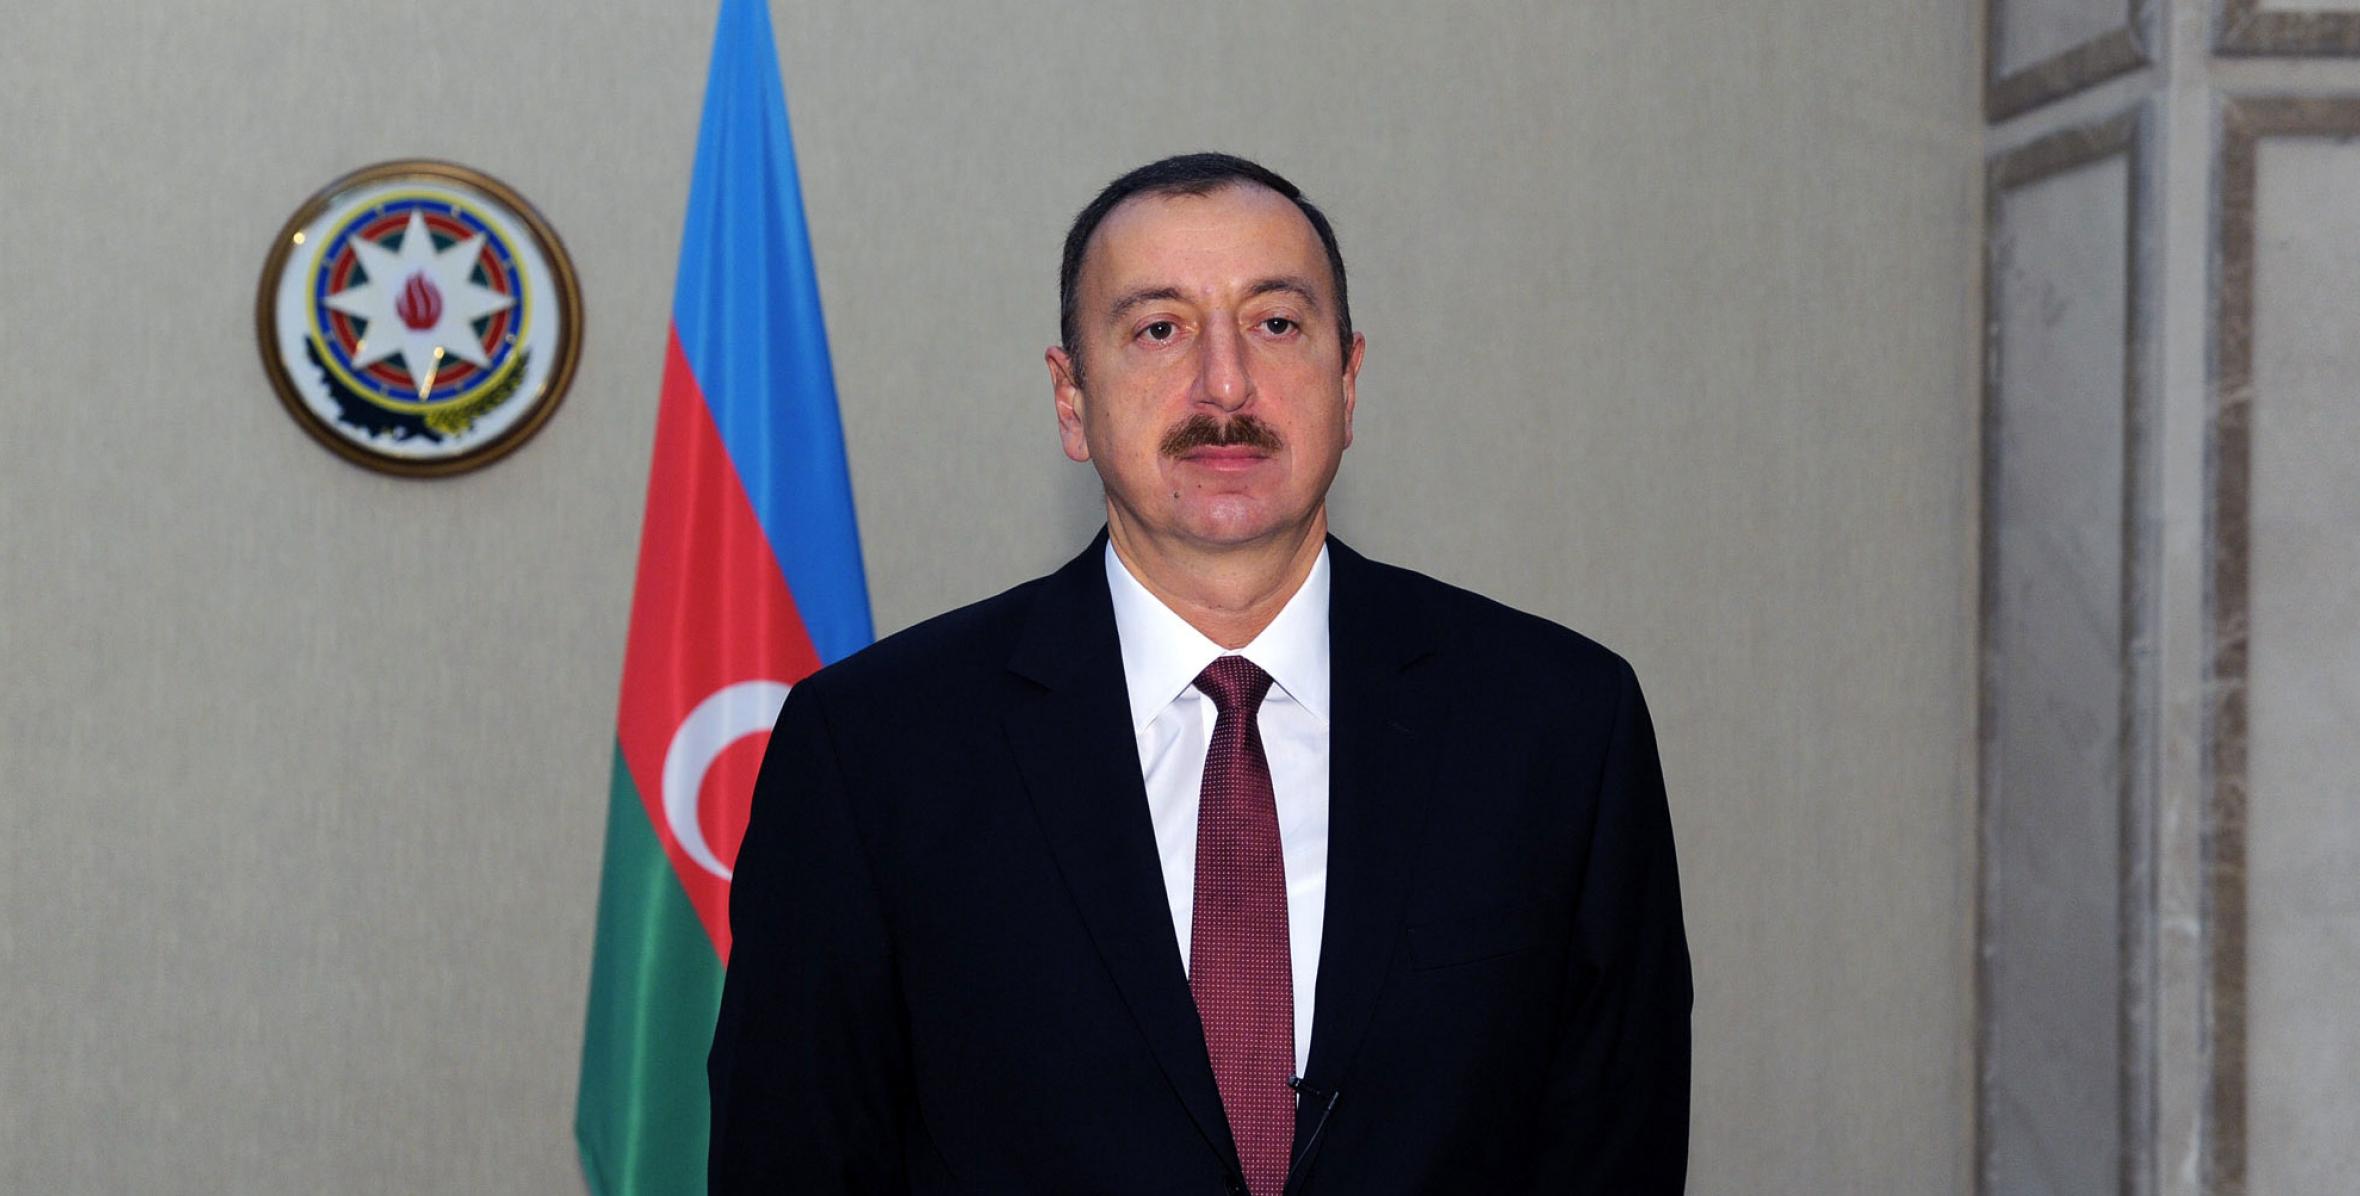 Statement by Ilham Aliyev over Azerbaijan’s election a member of the UN Security Council